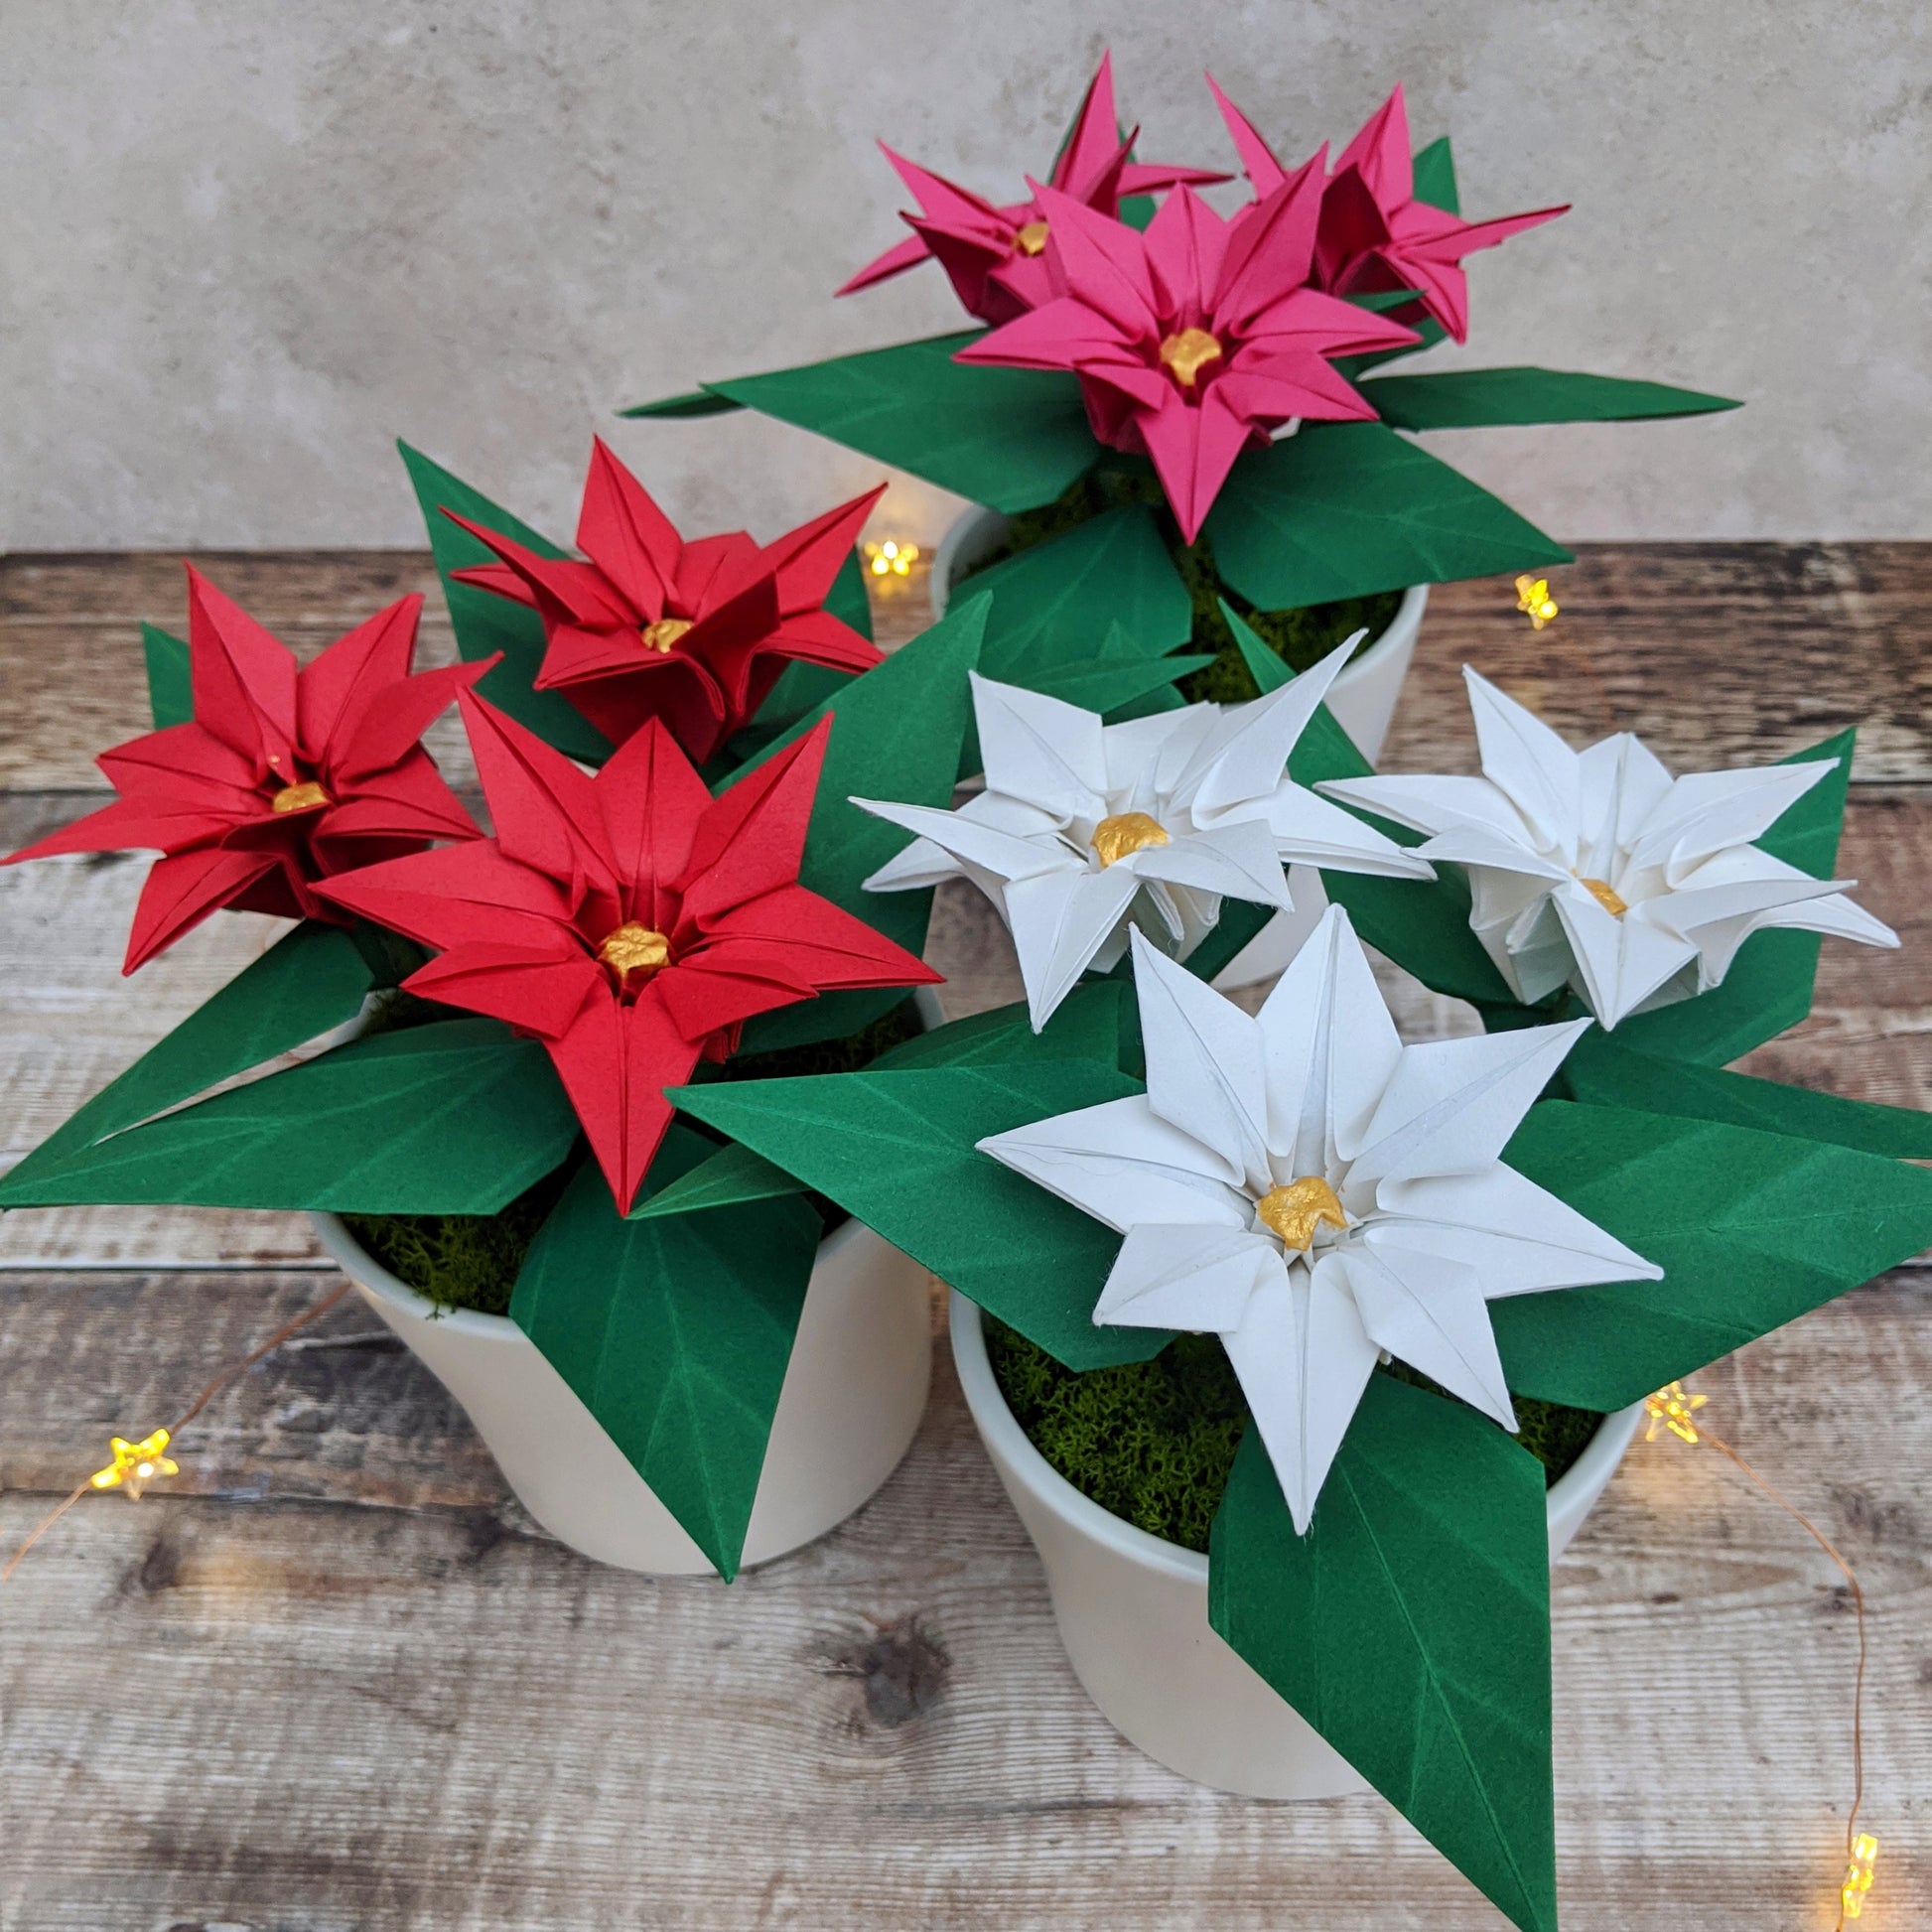 A group of three origami paper poinsettia potted plants - one red, one pink and one white